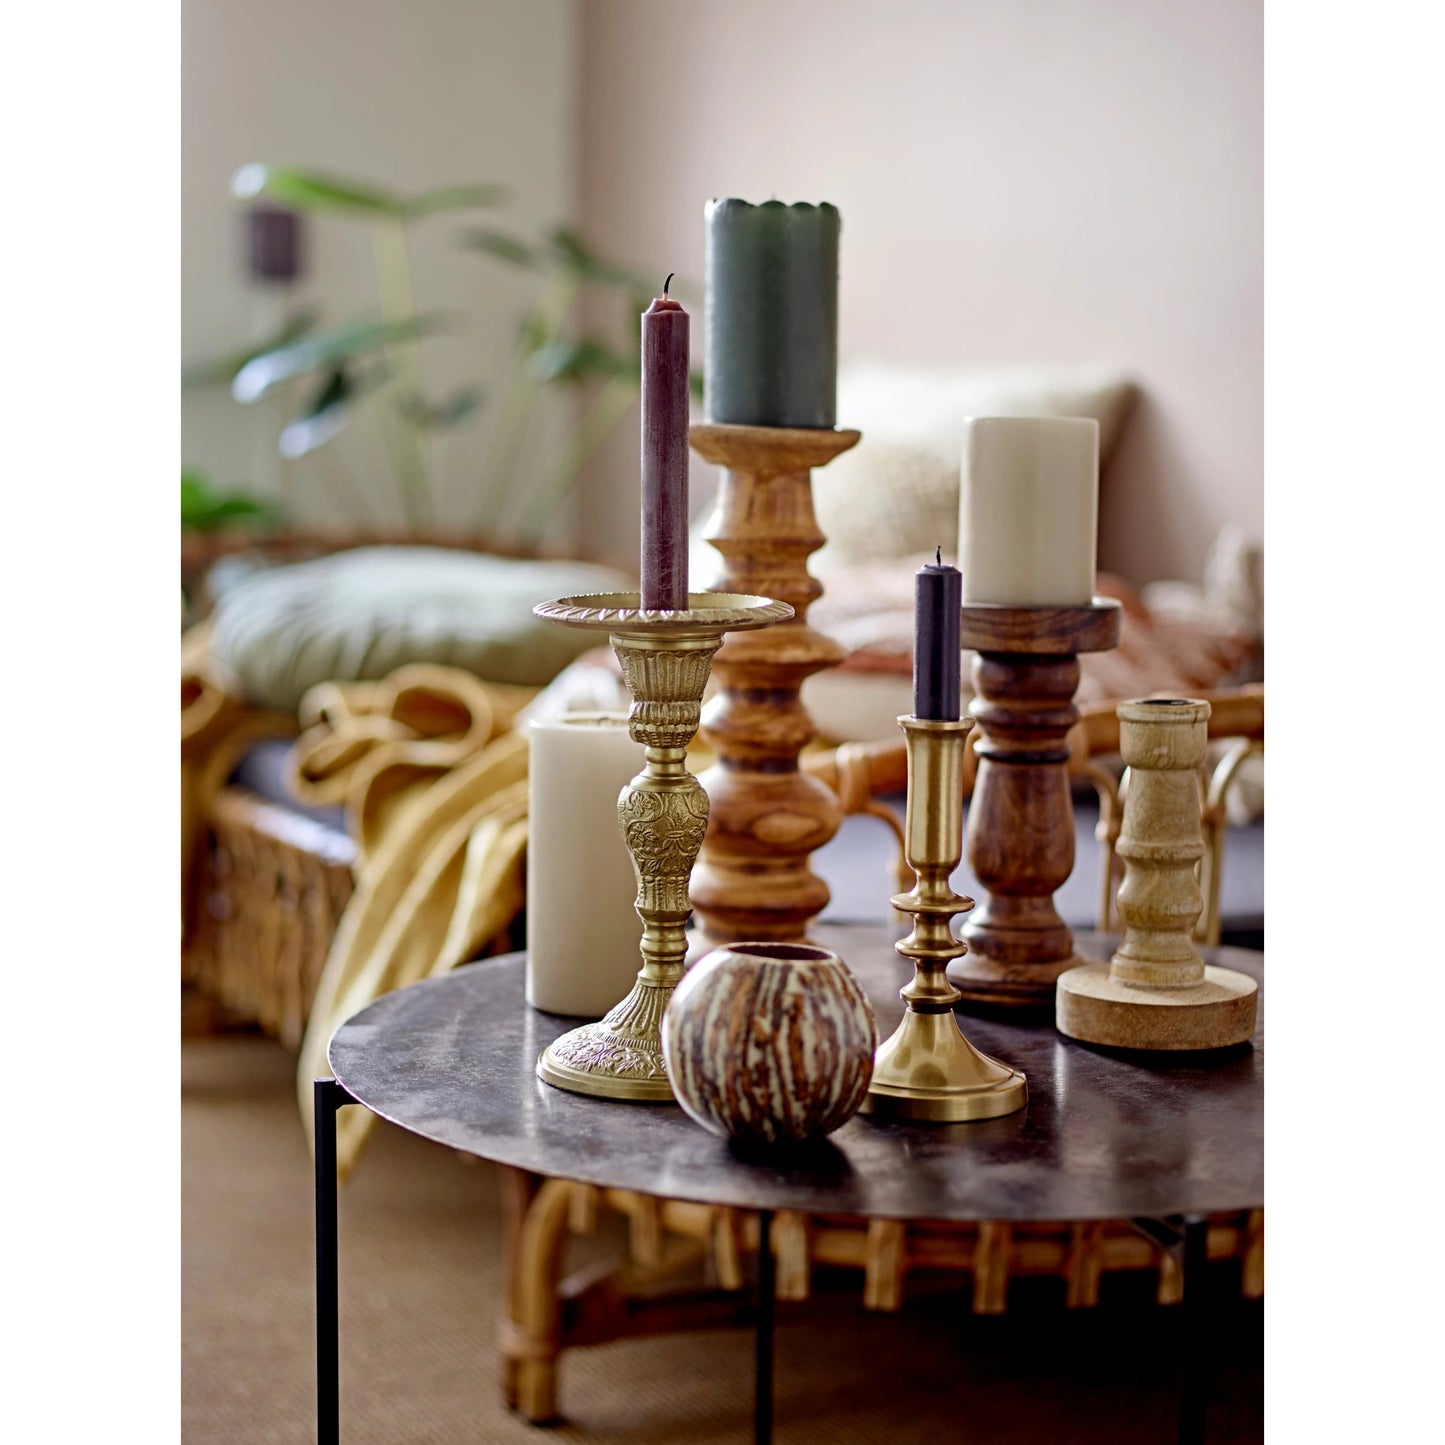 assortment of candle holders arranged on a side table with a couch in the background.